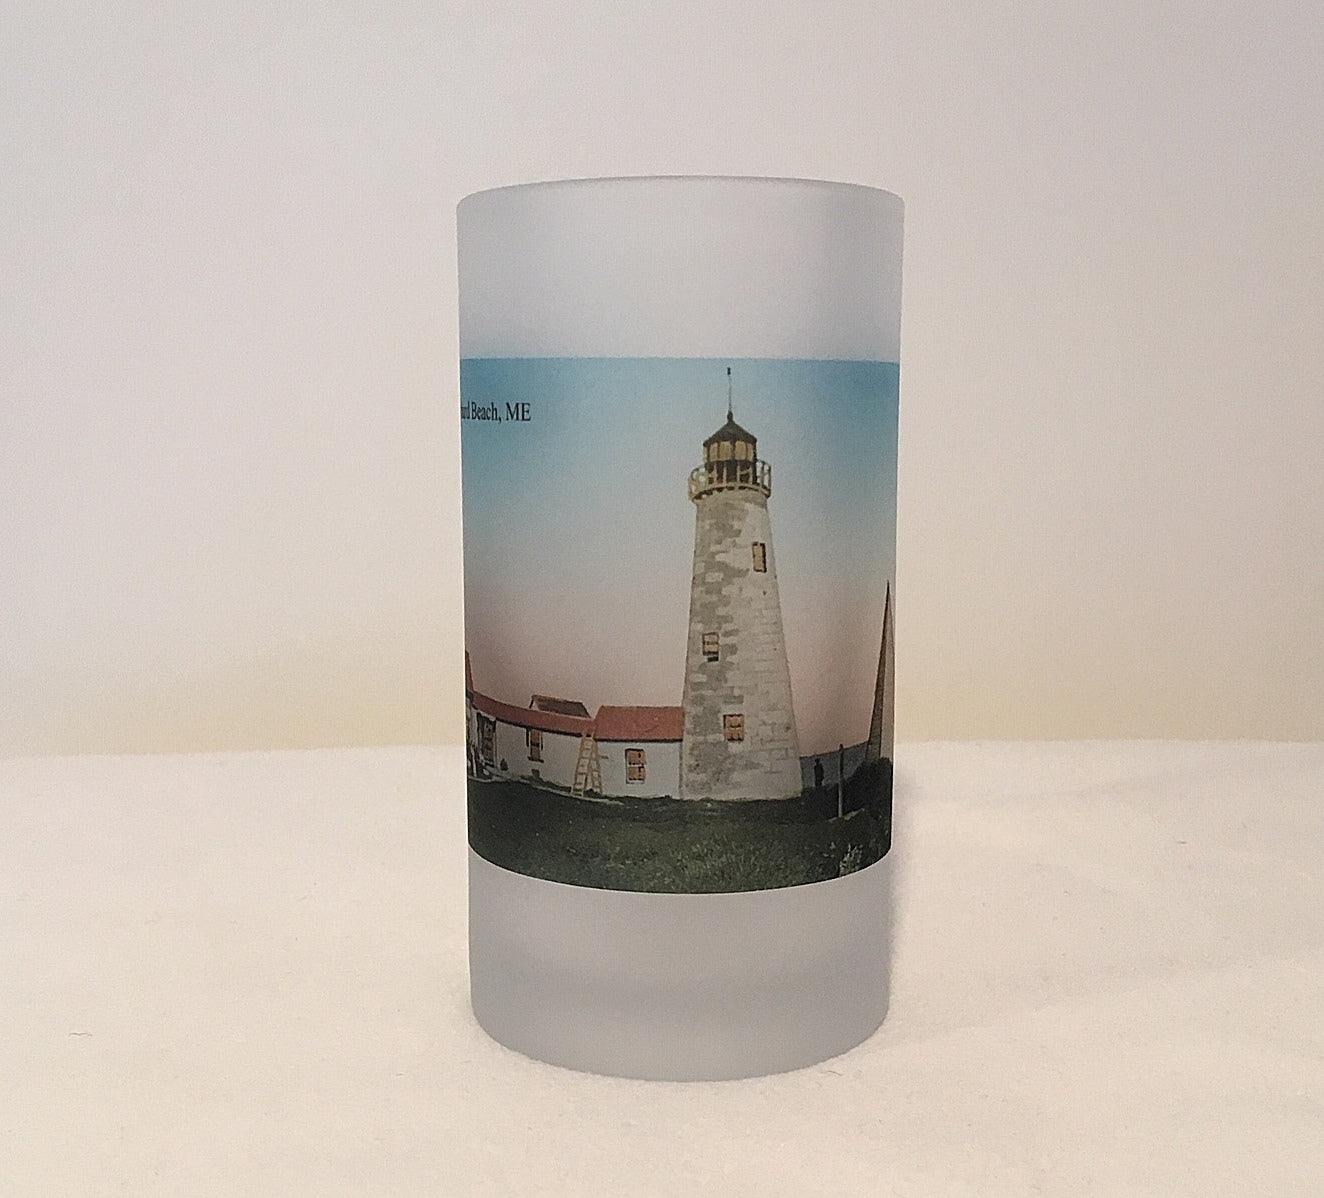 Colorful Frosted Glass Beer Mug of Wood Island Light in Old Orchard Beach Maine - That Fabled Shore Home Decor